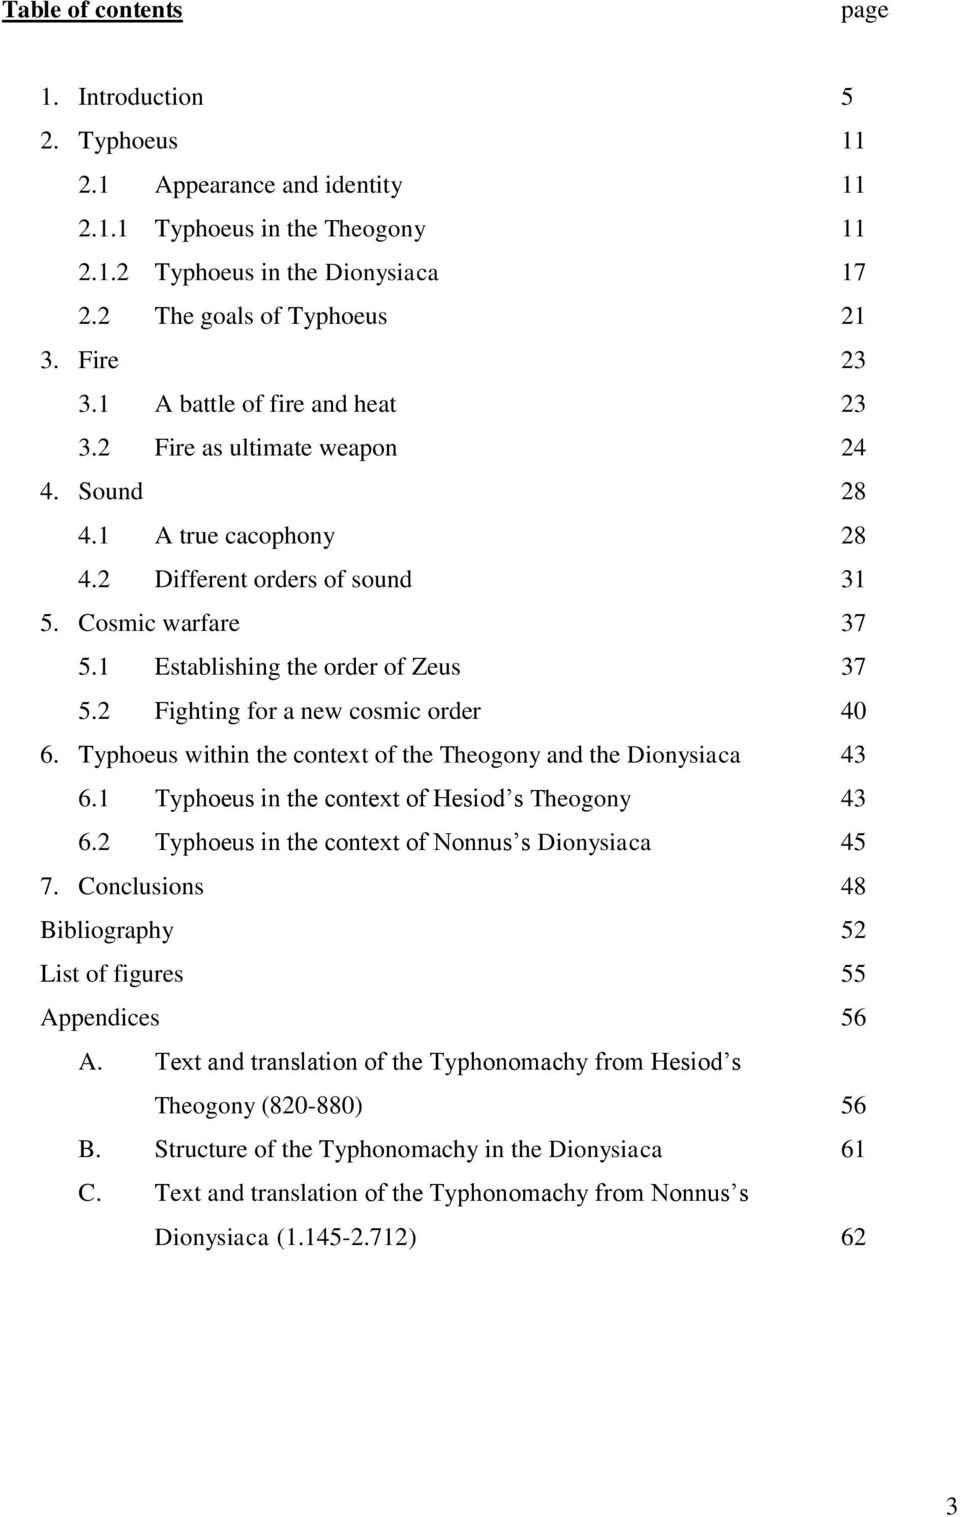 2 Fighting for a new cosmic order 40 6. Typhoeus within the context of the Theogony and the Dionysiaca 43 6.1 Typhoeus in the context of Hesiod s Theogony 43 6.